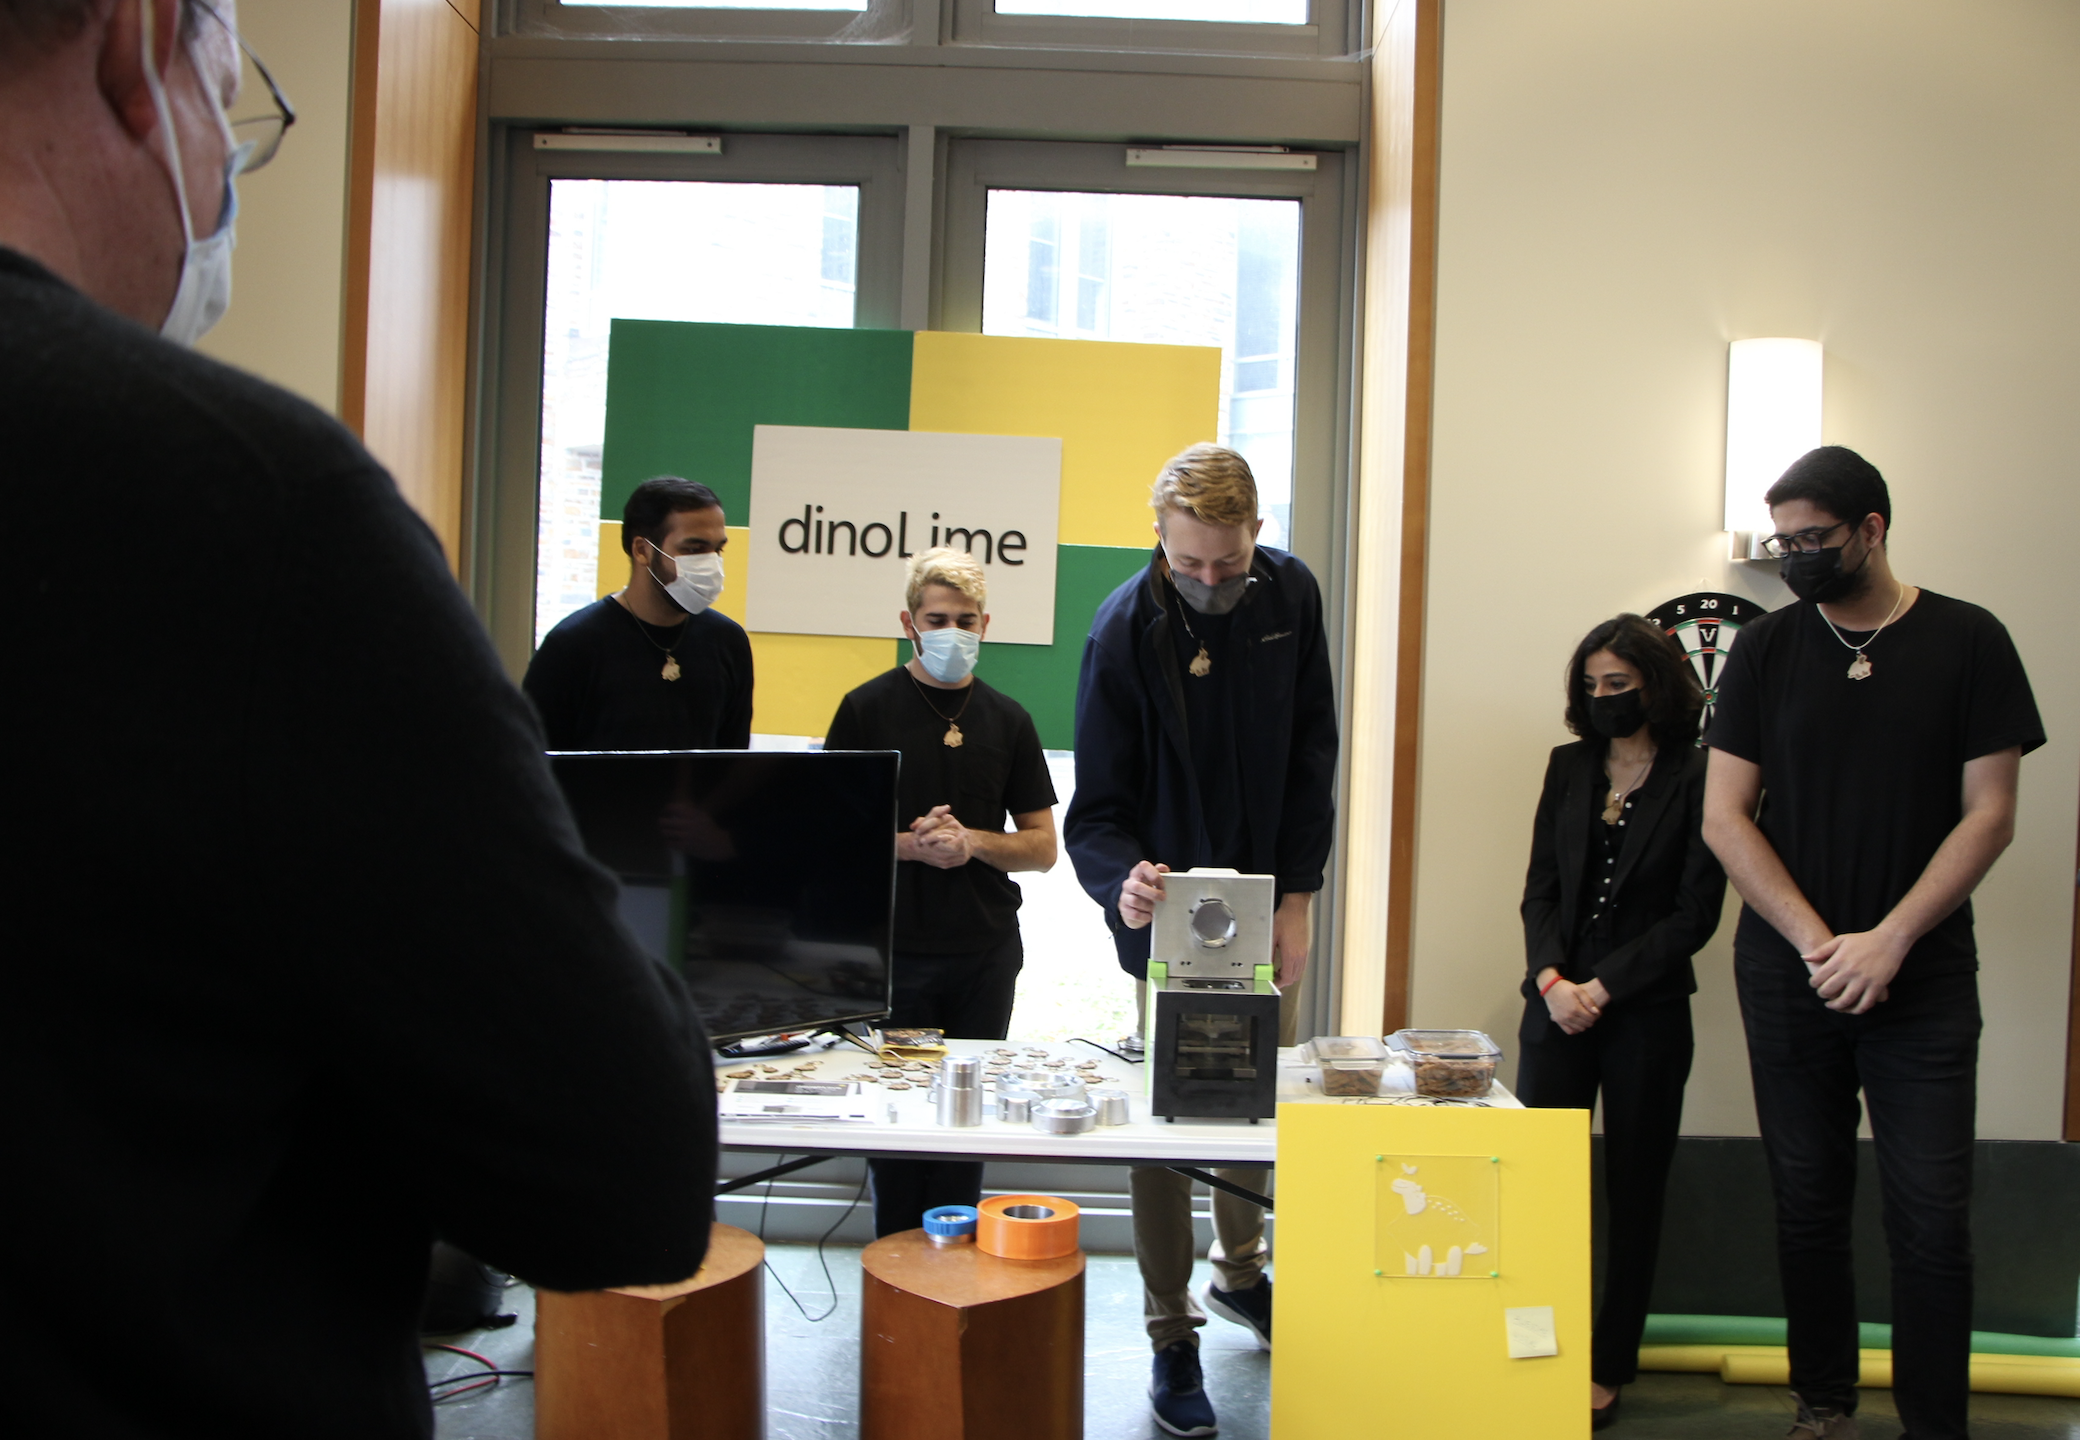 Students present their DoughLove oven product